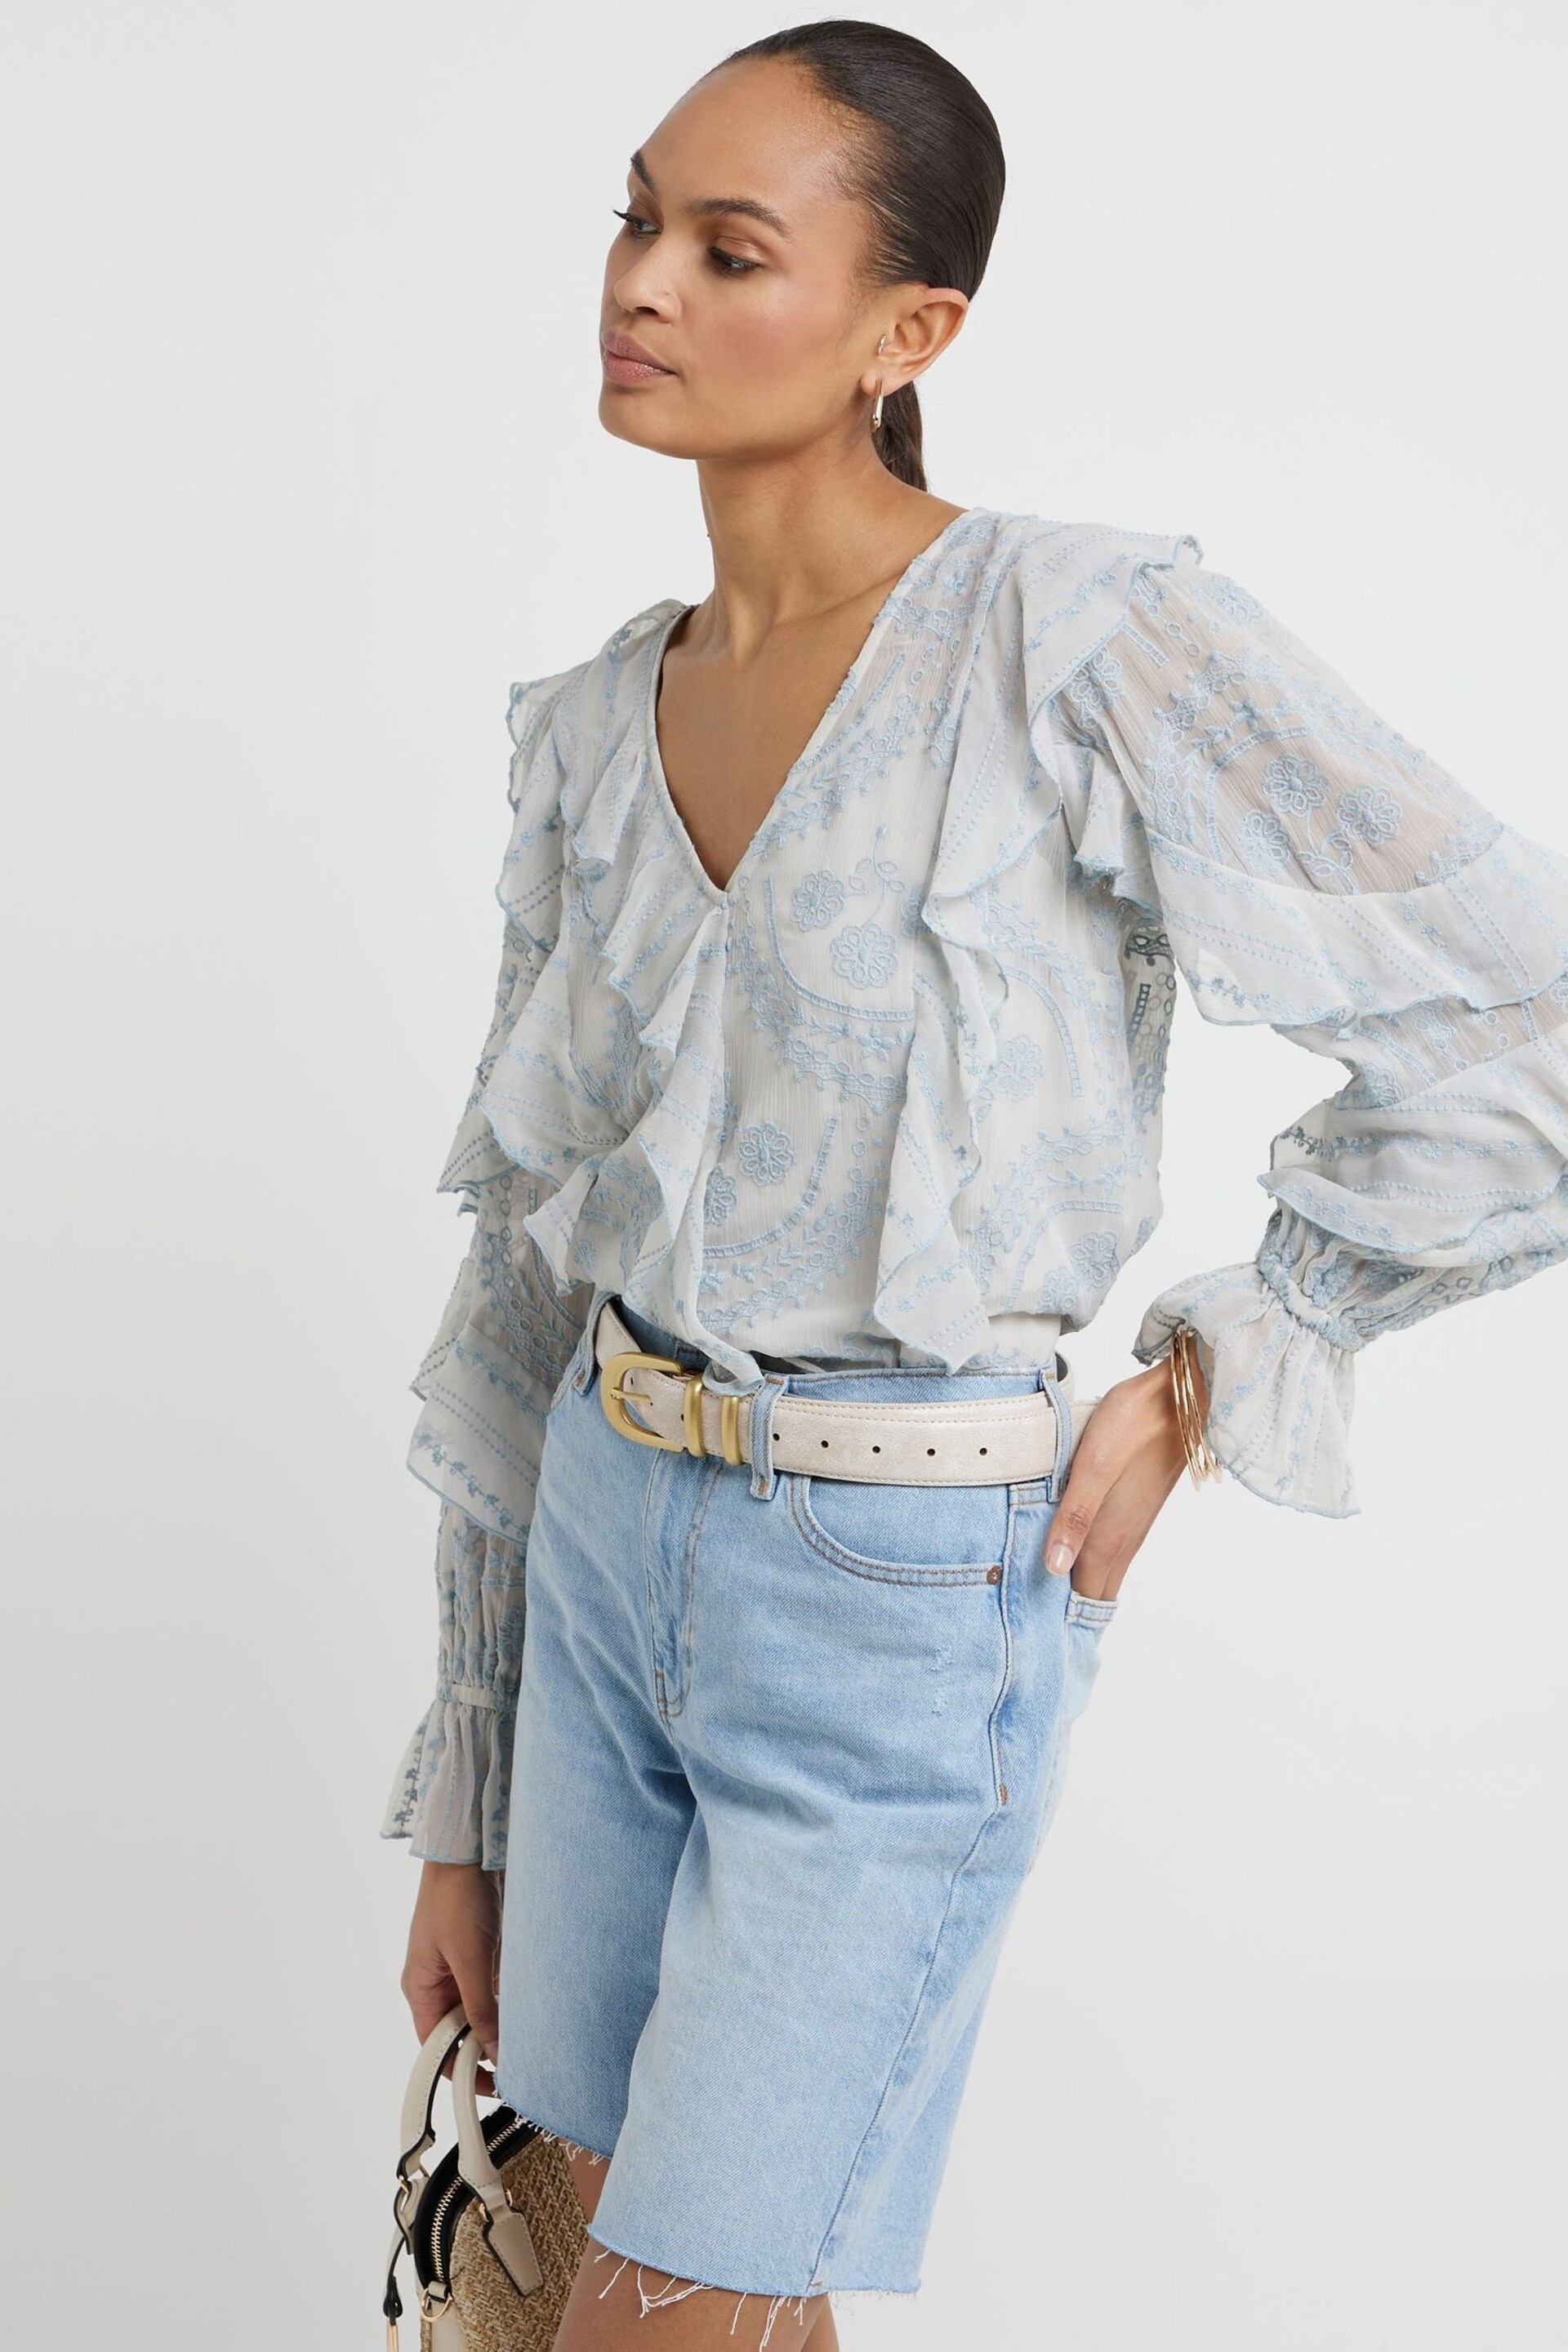 River Island Light Blue Broderie Frill Blouse - Image 3 of 6